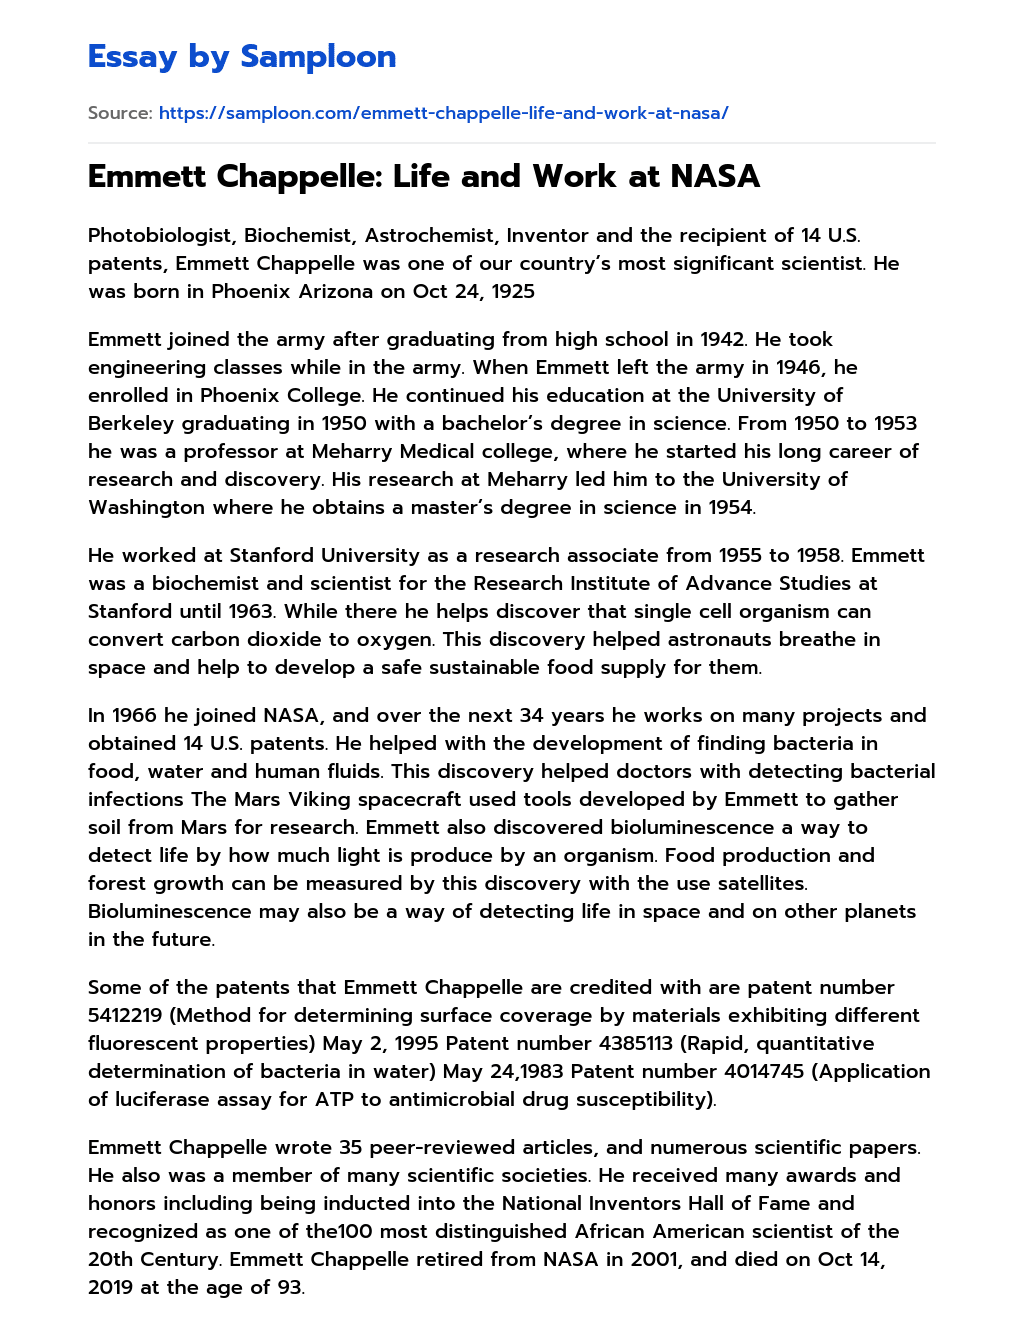 Emmett Chappelle: Life and Work at NASA essay